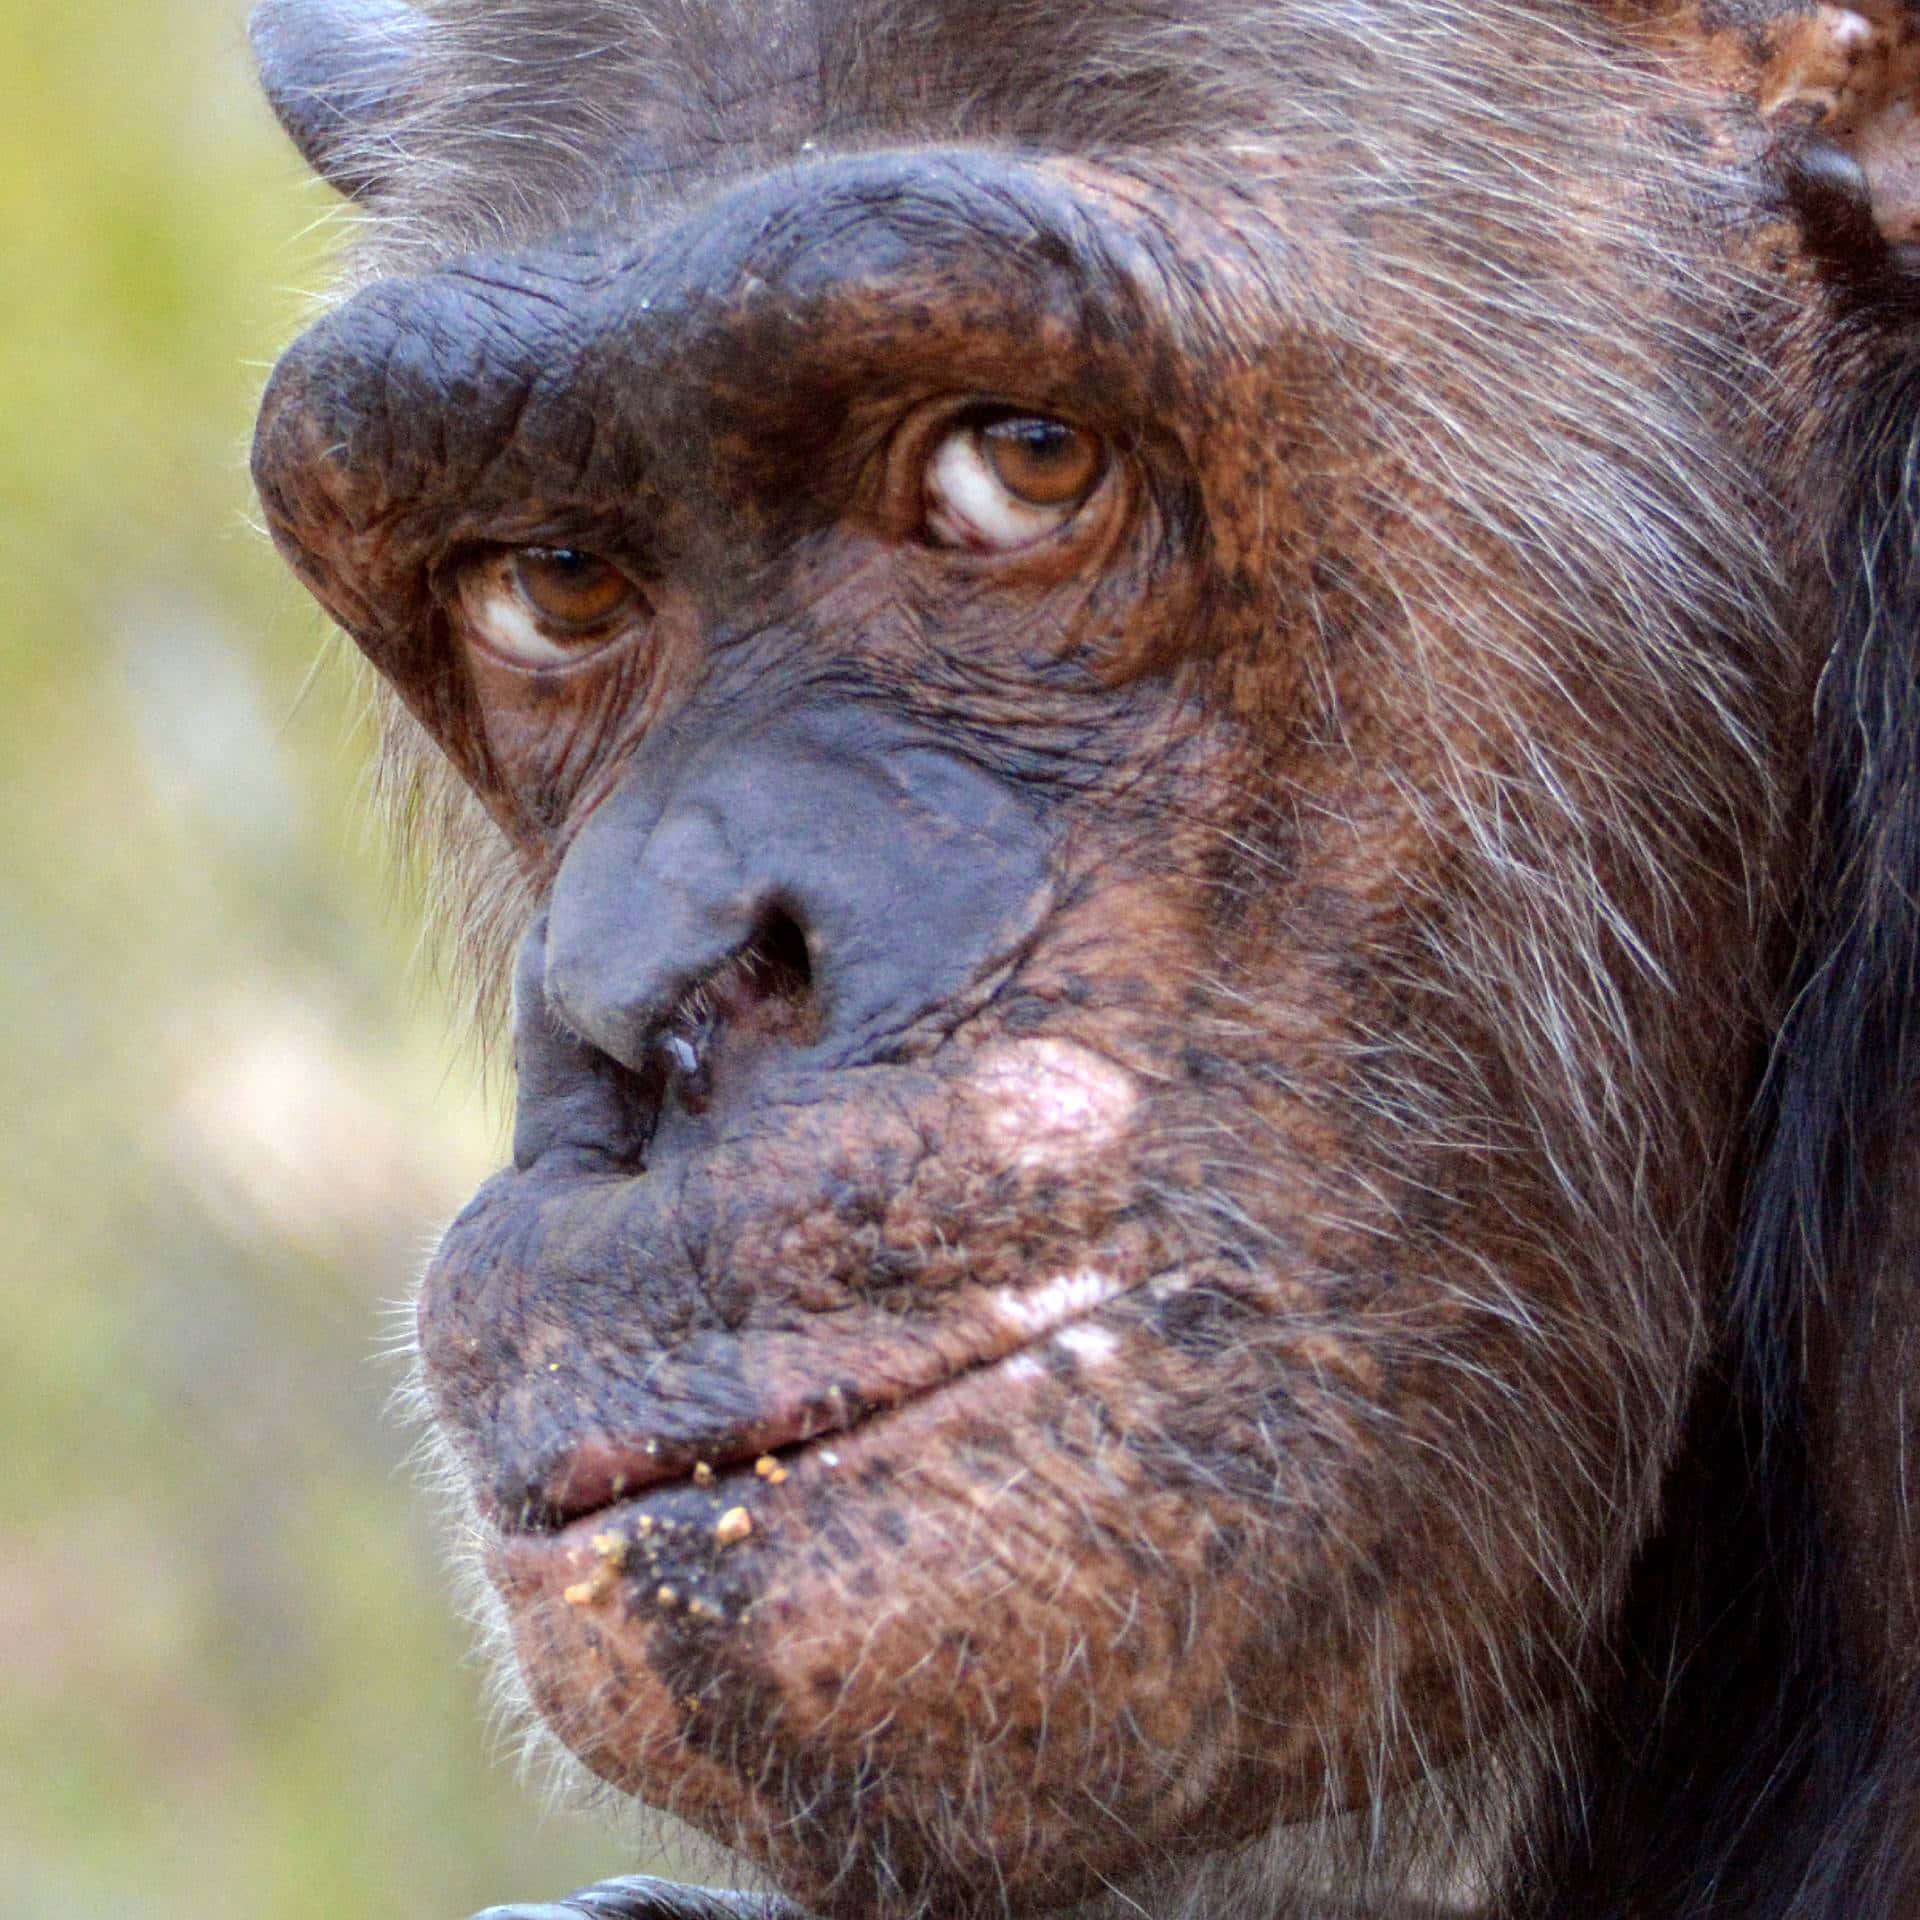 A happy Chimpanzee ape enjoying a bright sunny day in the forest.